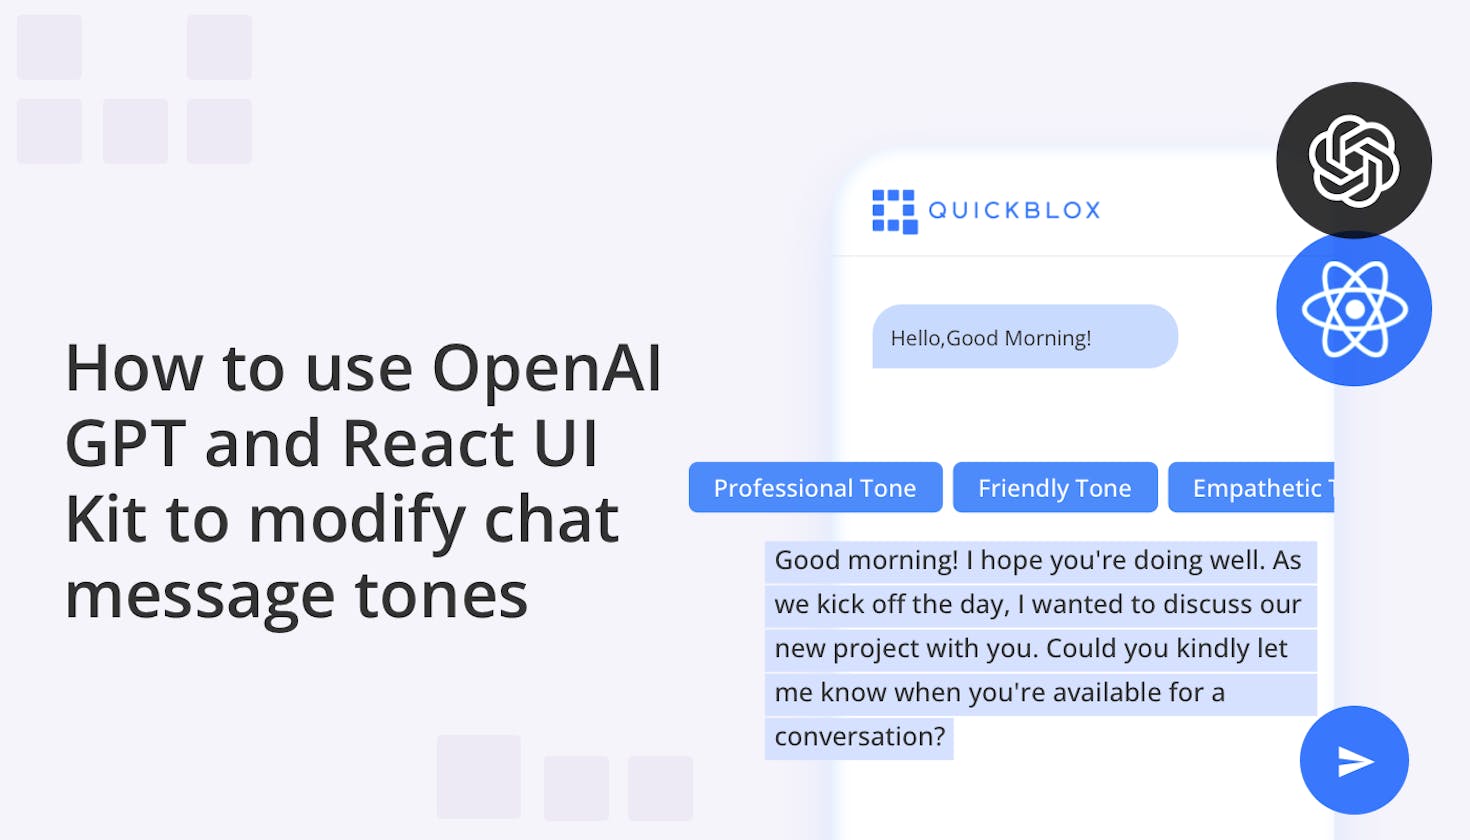 How to use OpenAI GPT and React UI Kit to modify chat message tones